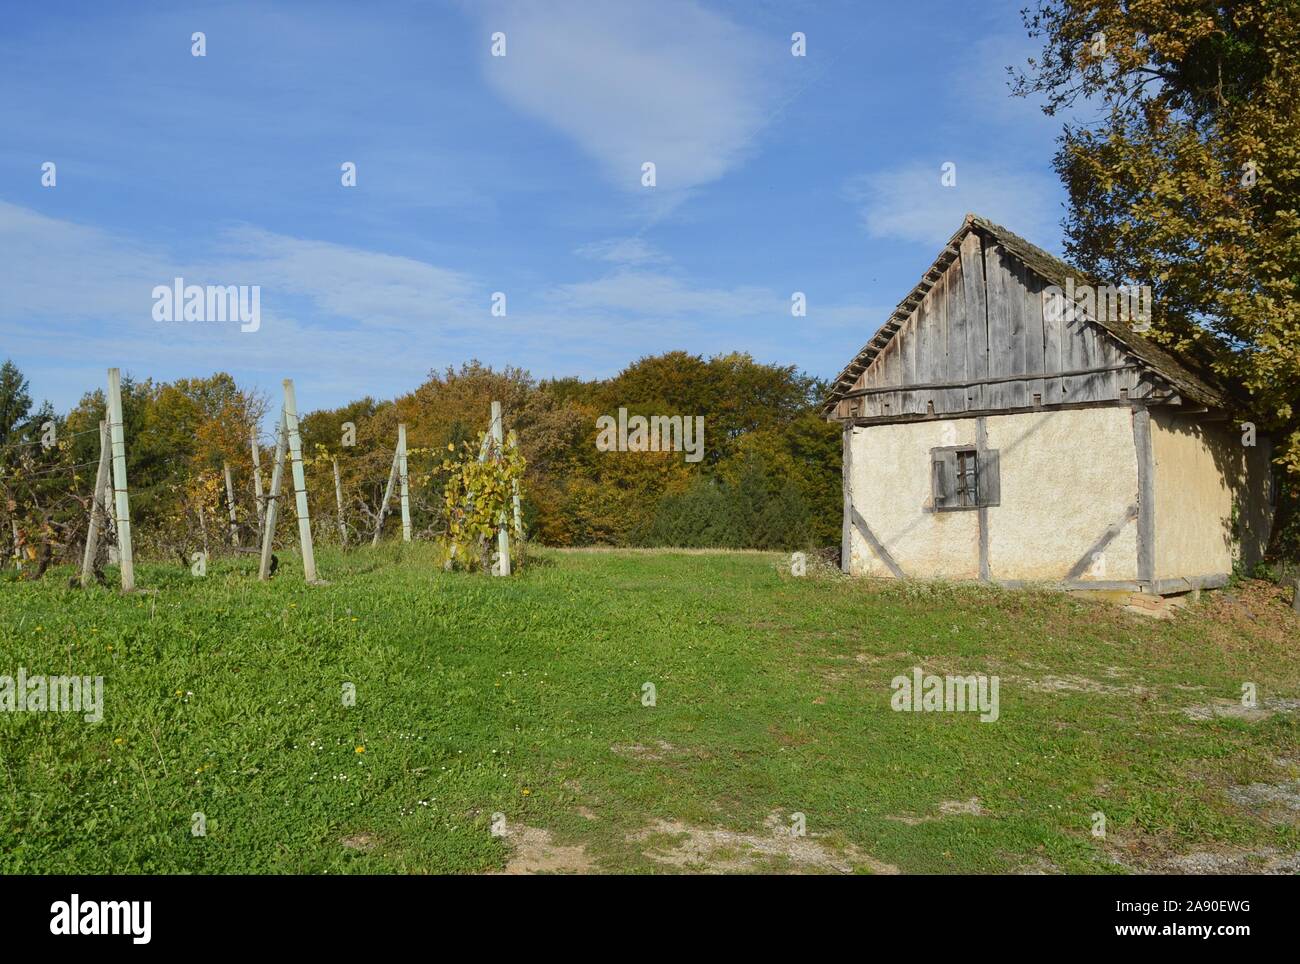 Old traditional house with vineyard in croatian countryside, autumn colors Stock Photo